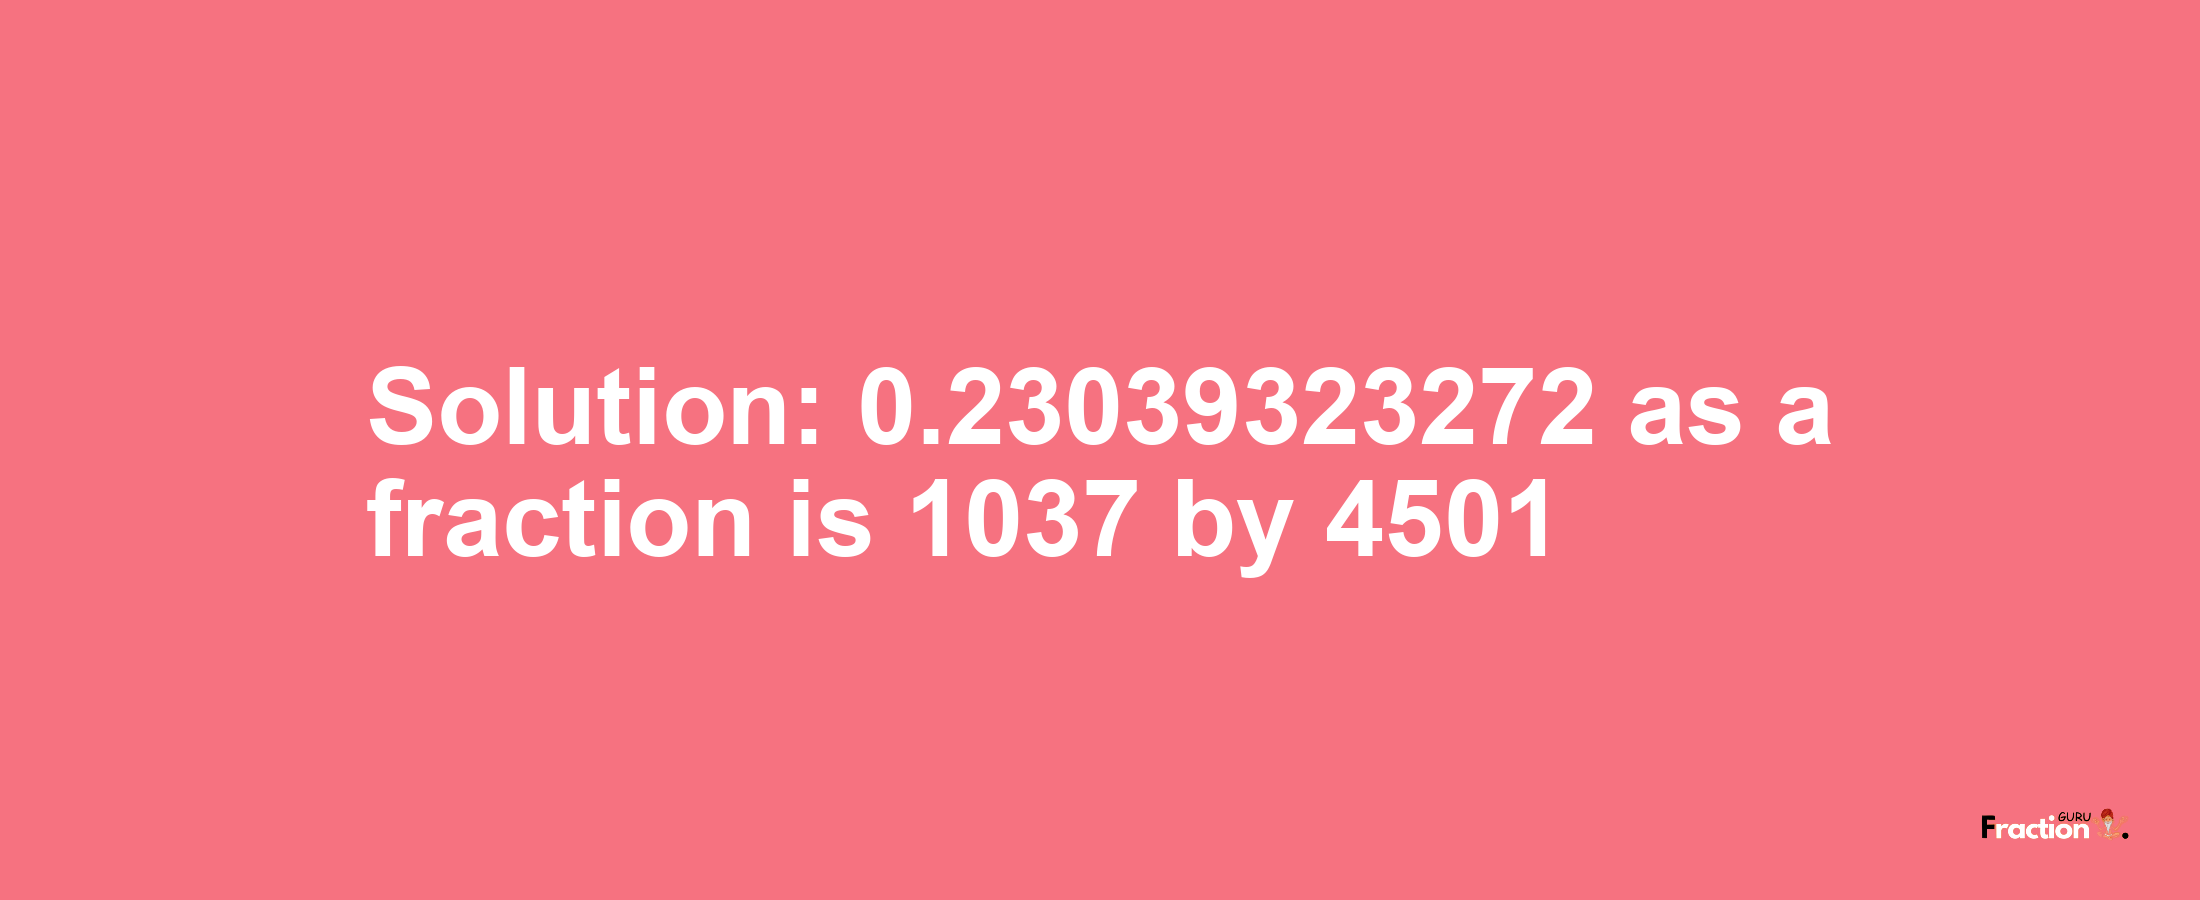 Solution:0.23039323272 as a fraction is 1037/4501